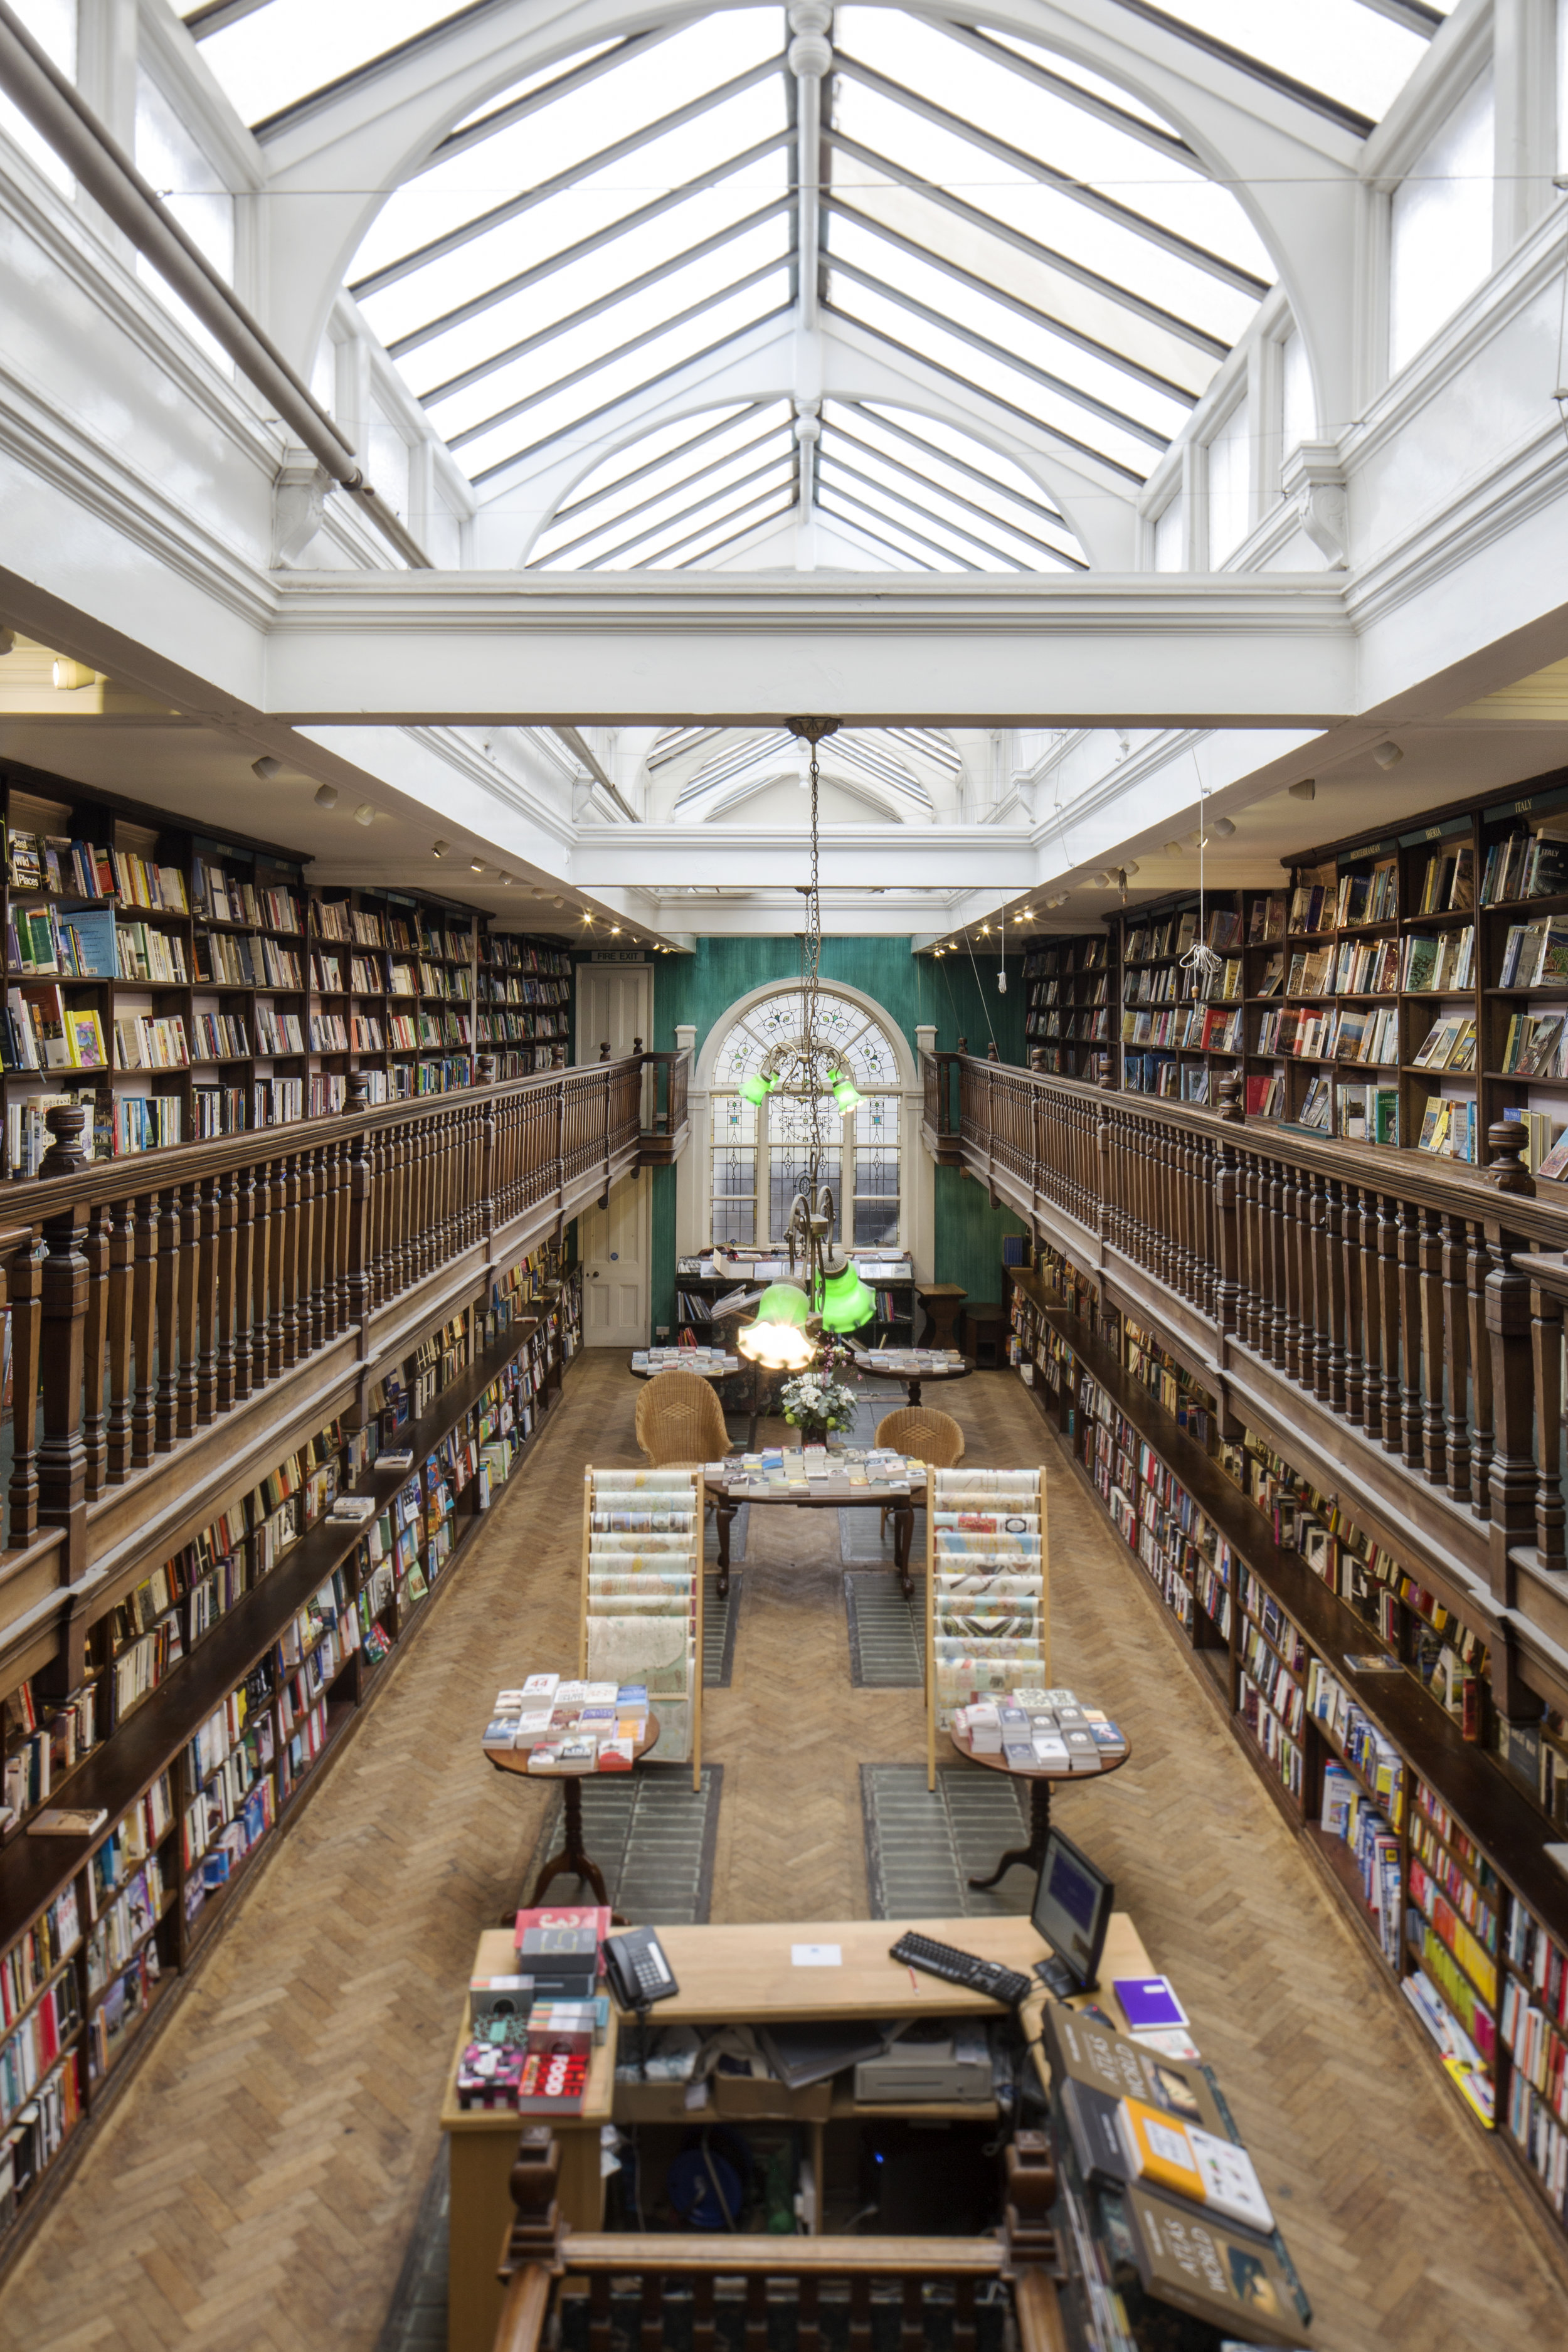  Daunt Books  83 Marylebone High Street  Daunt Books flagship store on Marylebone High Street is located in an original Edwardian bookshop with long oak galleries, a balconied rear room and full of light from the elegant skylights. Daunt Books is now